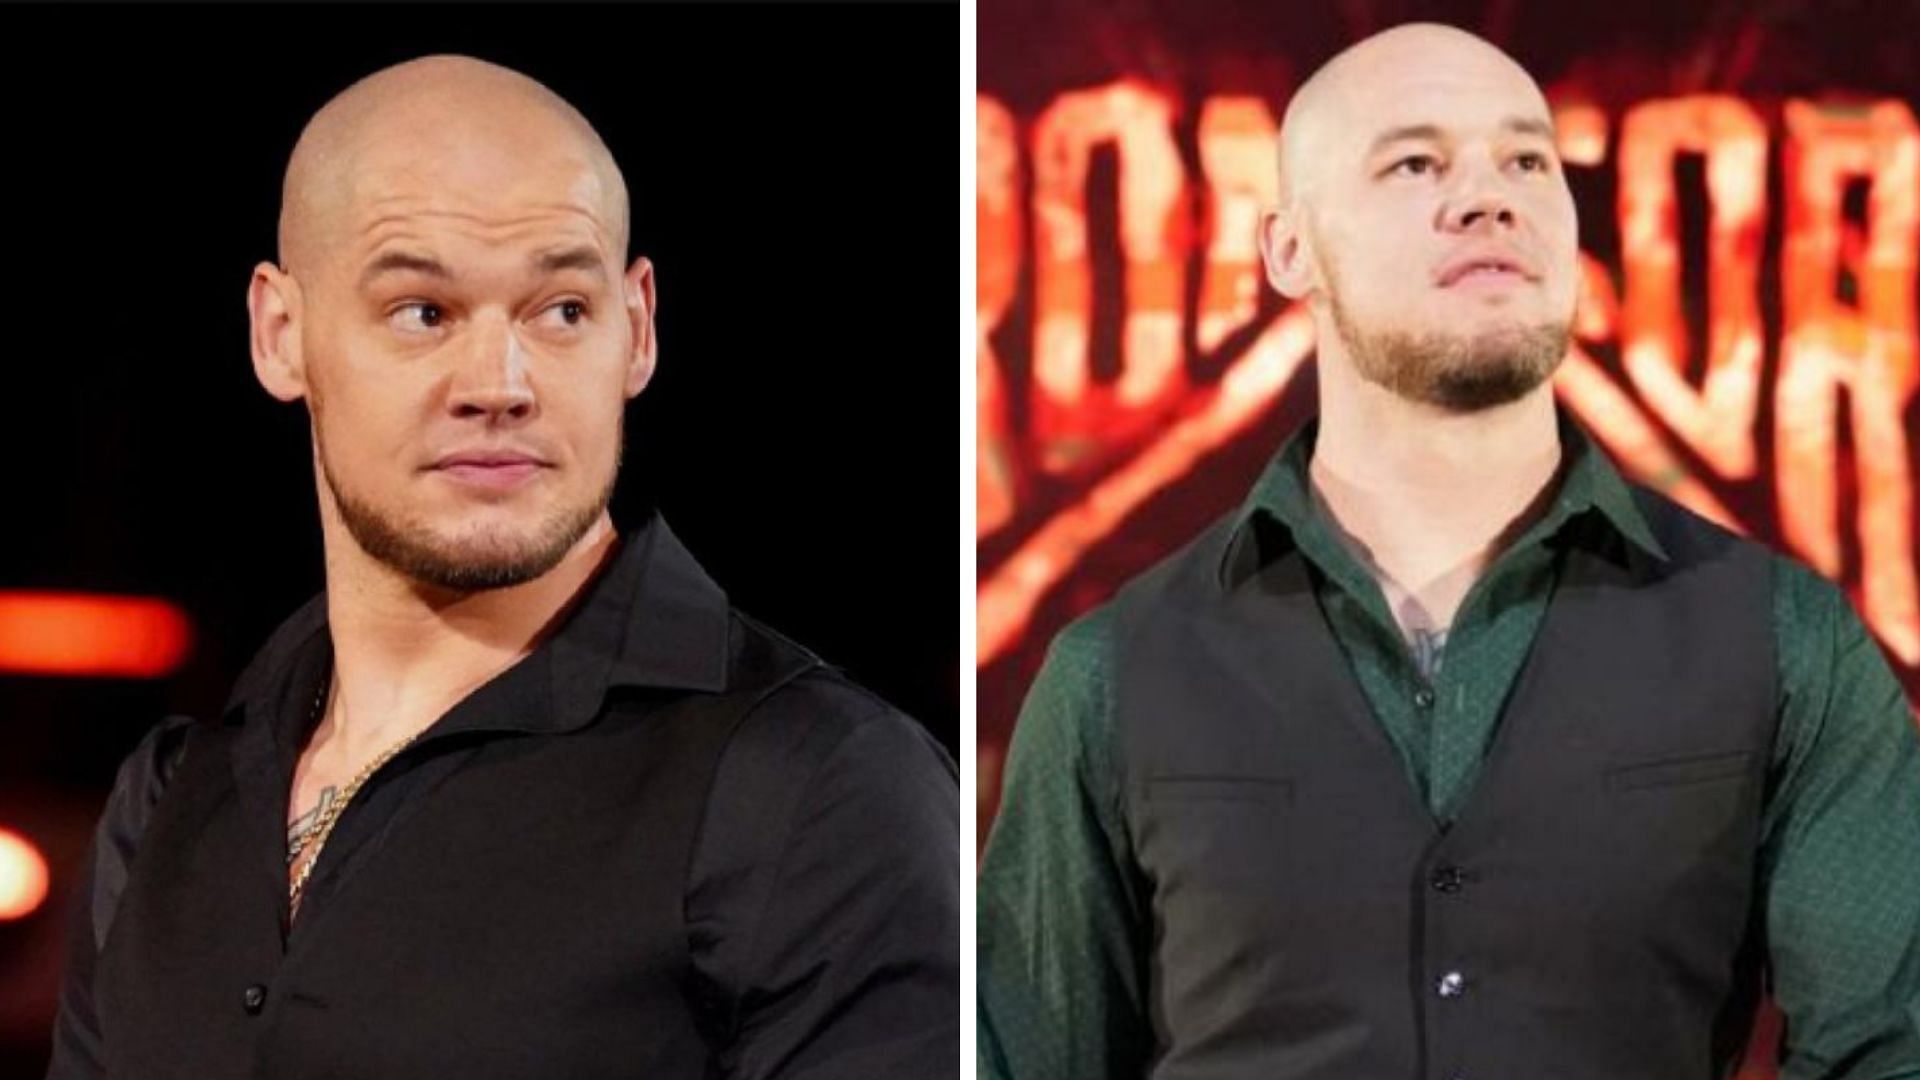 Baron Corbin recently returned to WWE RAW with JBL as his manager